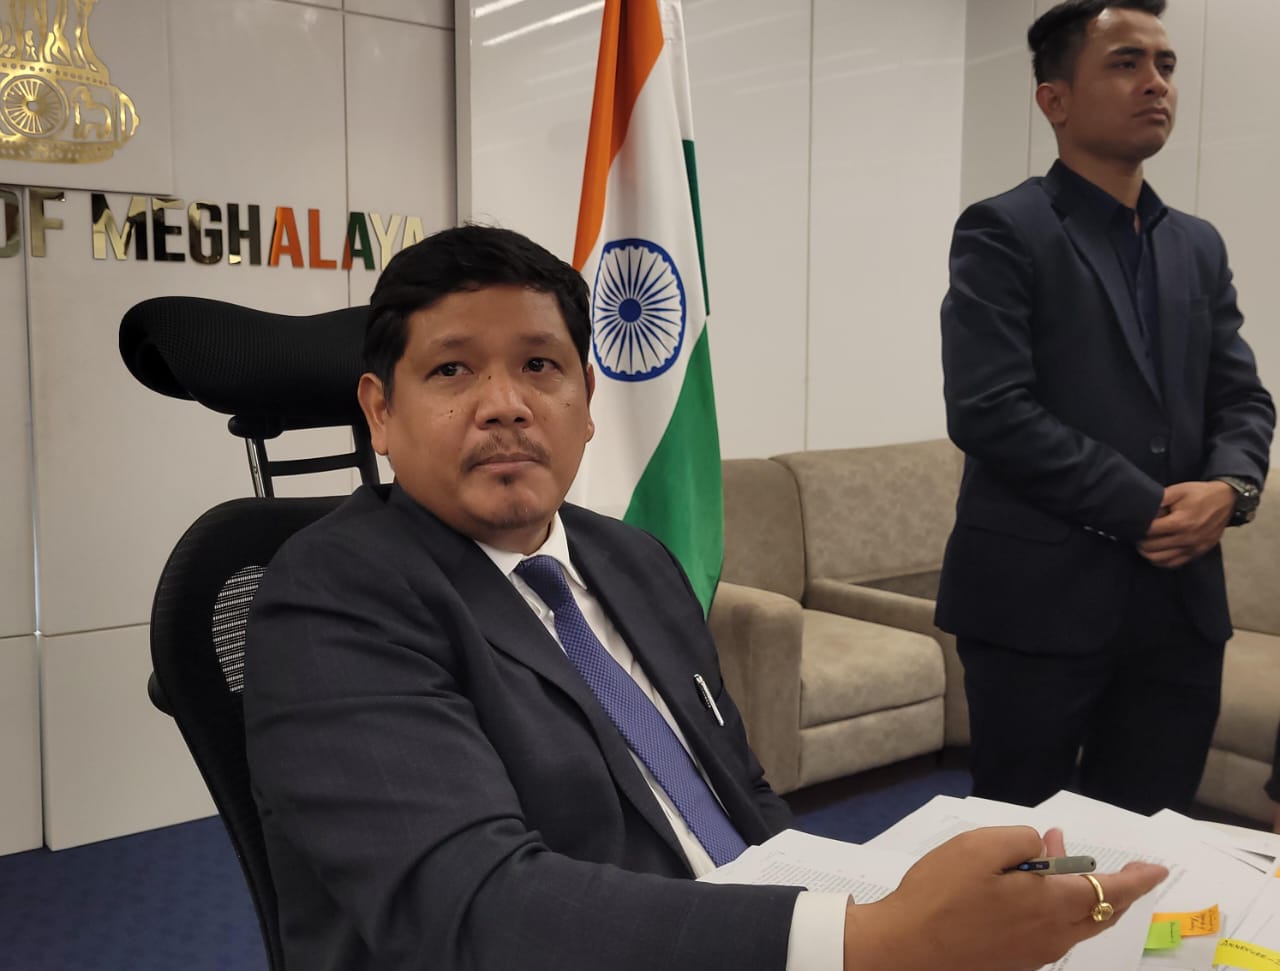 Meghalaya CM says Confrontation not solution to resolve differences with Assam